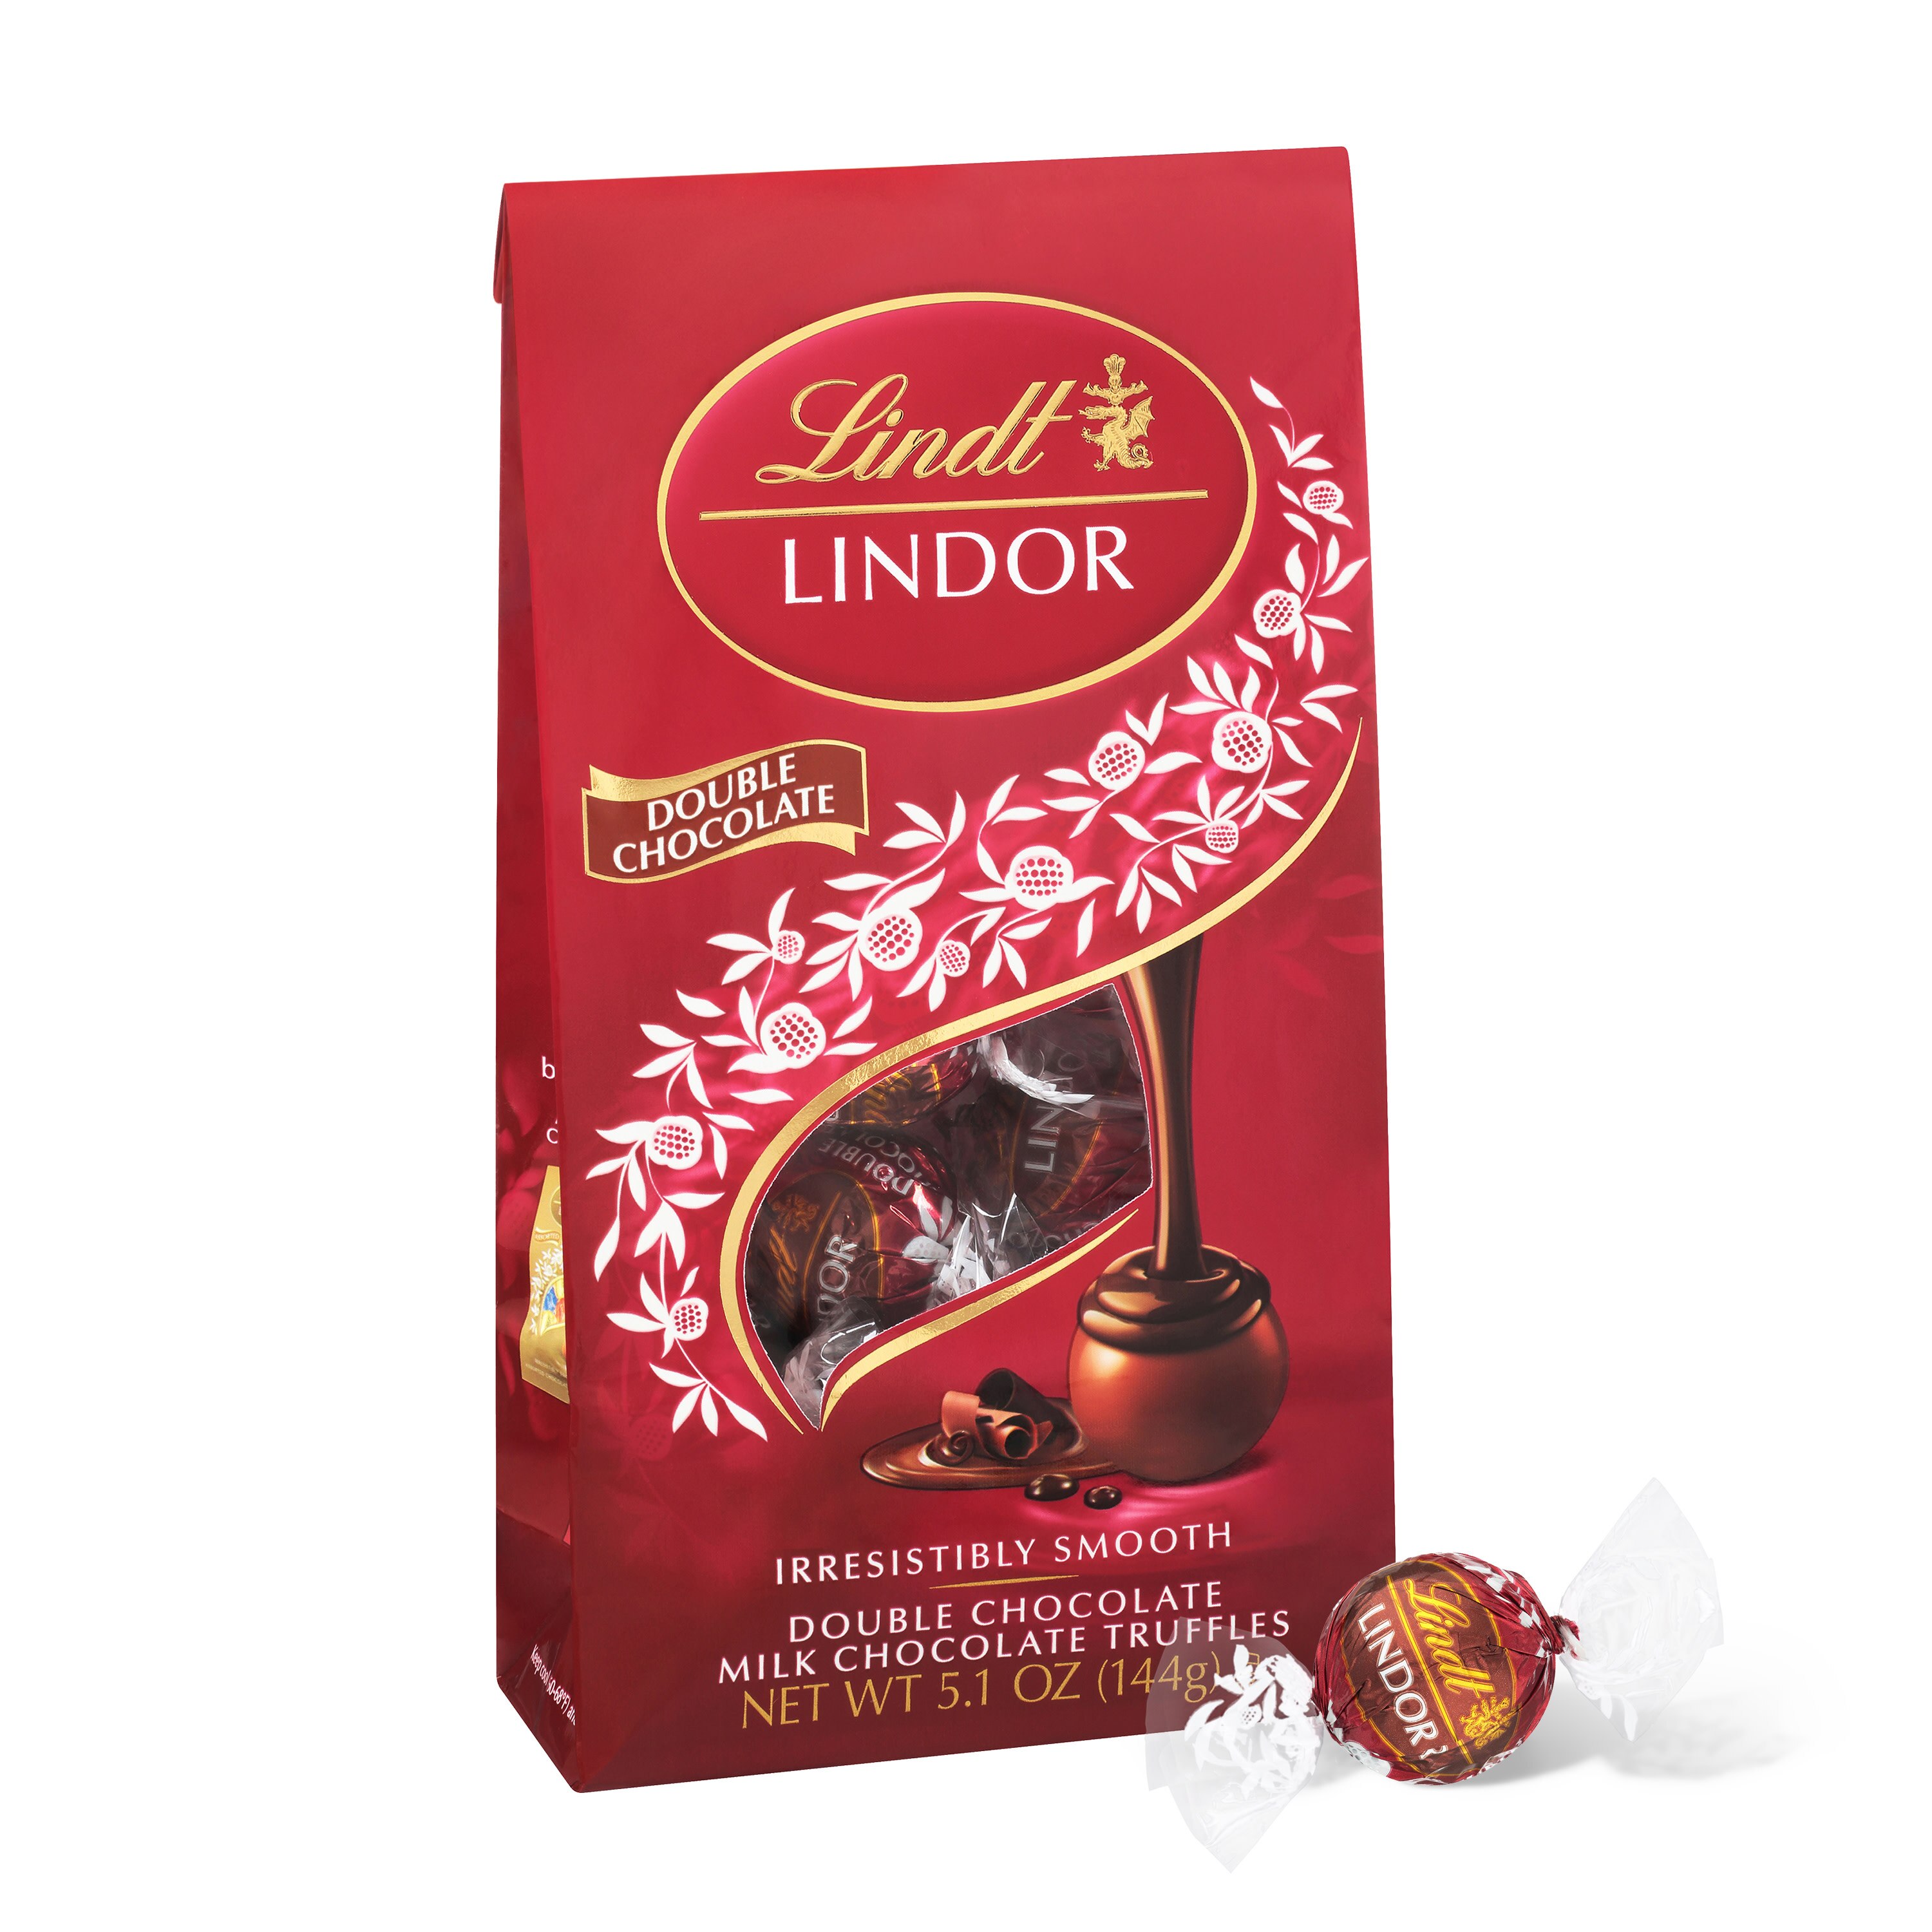 Lindt Lindor Double Chocolate Milk Chocolate Candy Truffles, Chocolates with Smooth, Melting Truffle Center, 5.1 oz. Bag